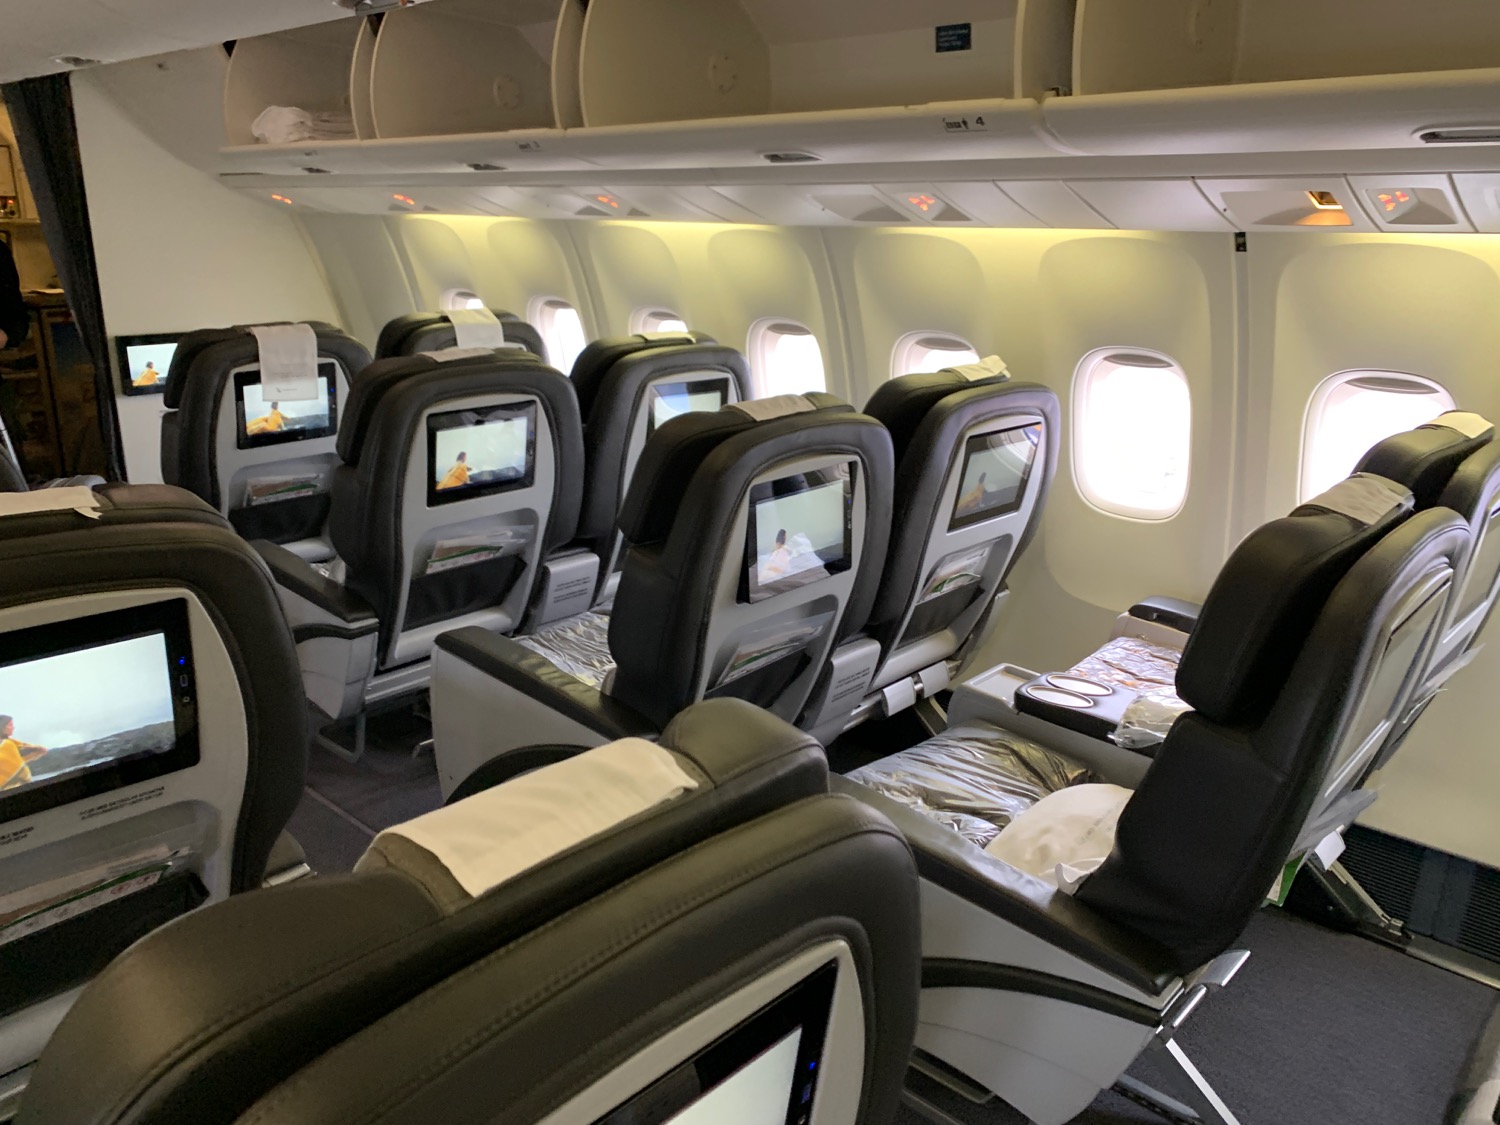 Review Icelandair 767300ER Business Class Live and Let's Fly